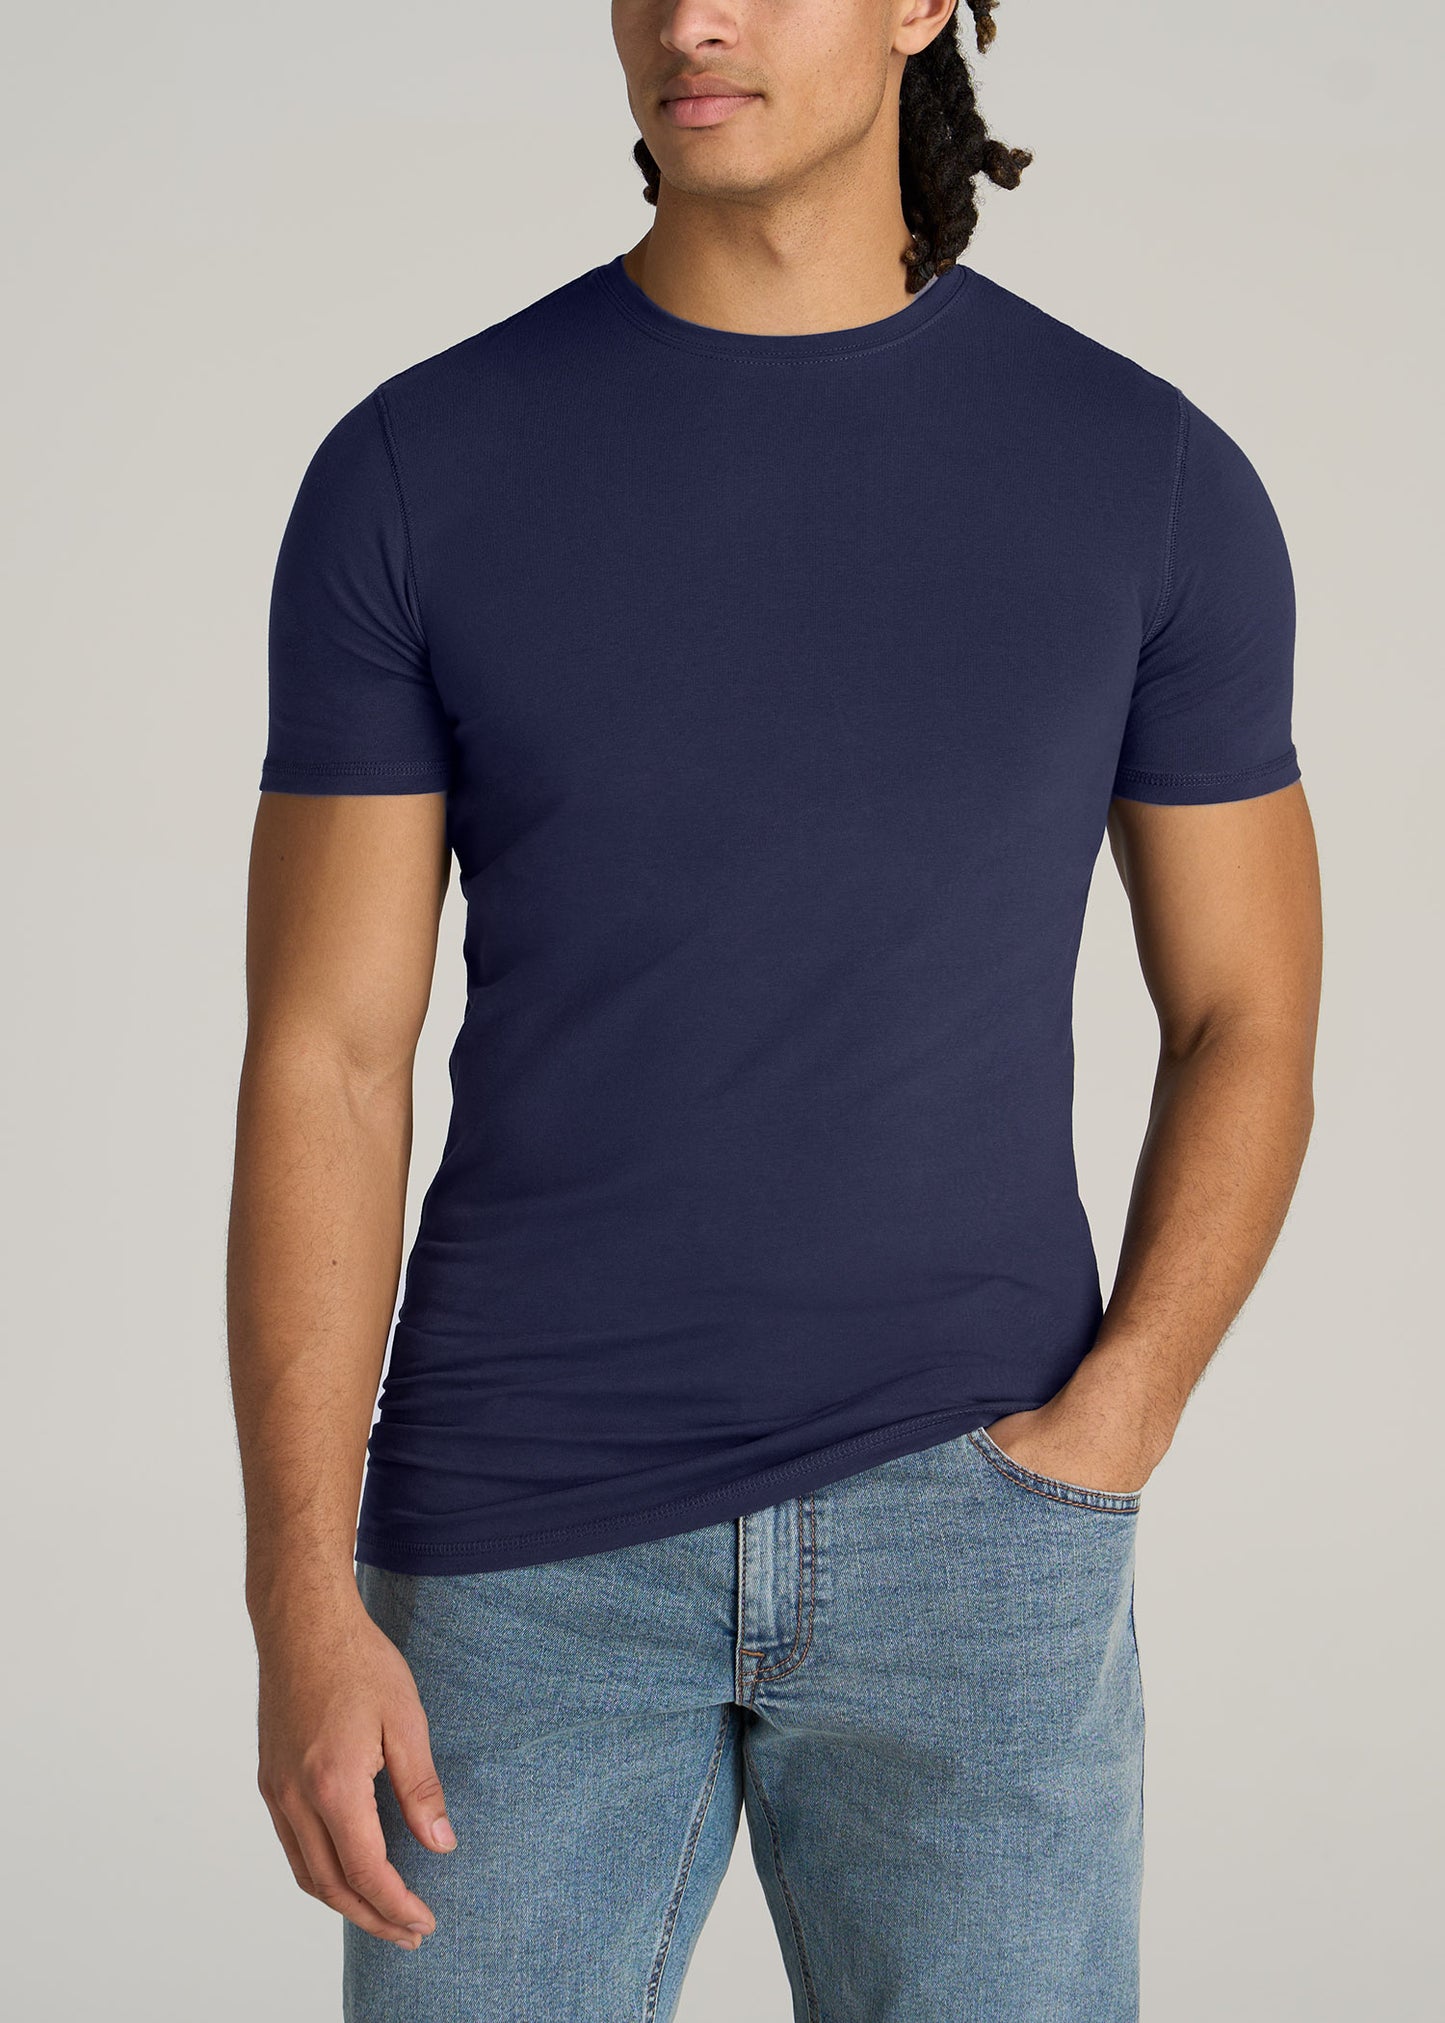     American-Tall-Men-Essential-SLIM-FIT-Crew-Neck-Tees-Navy-front